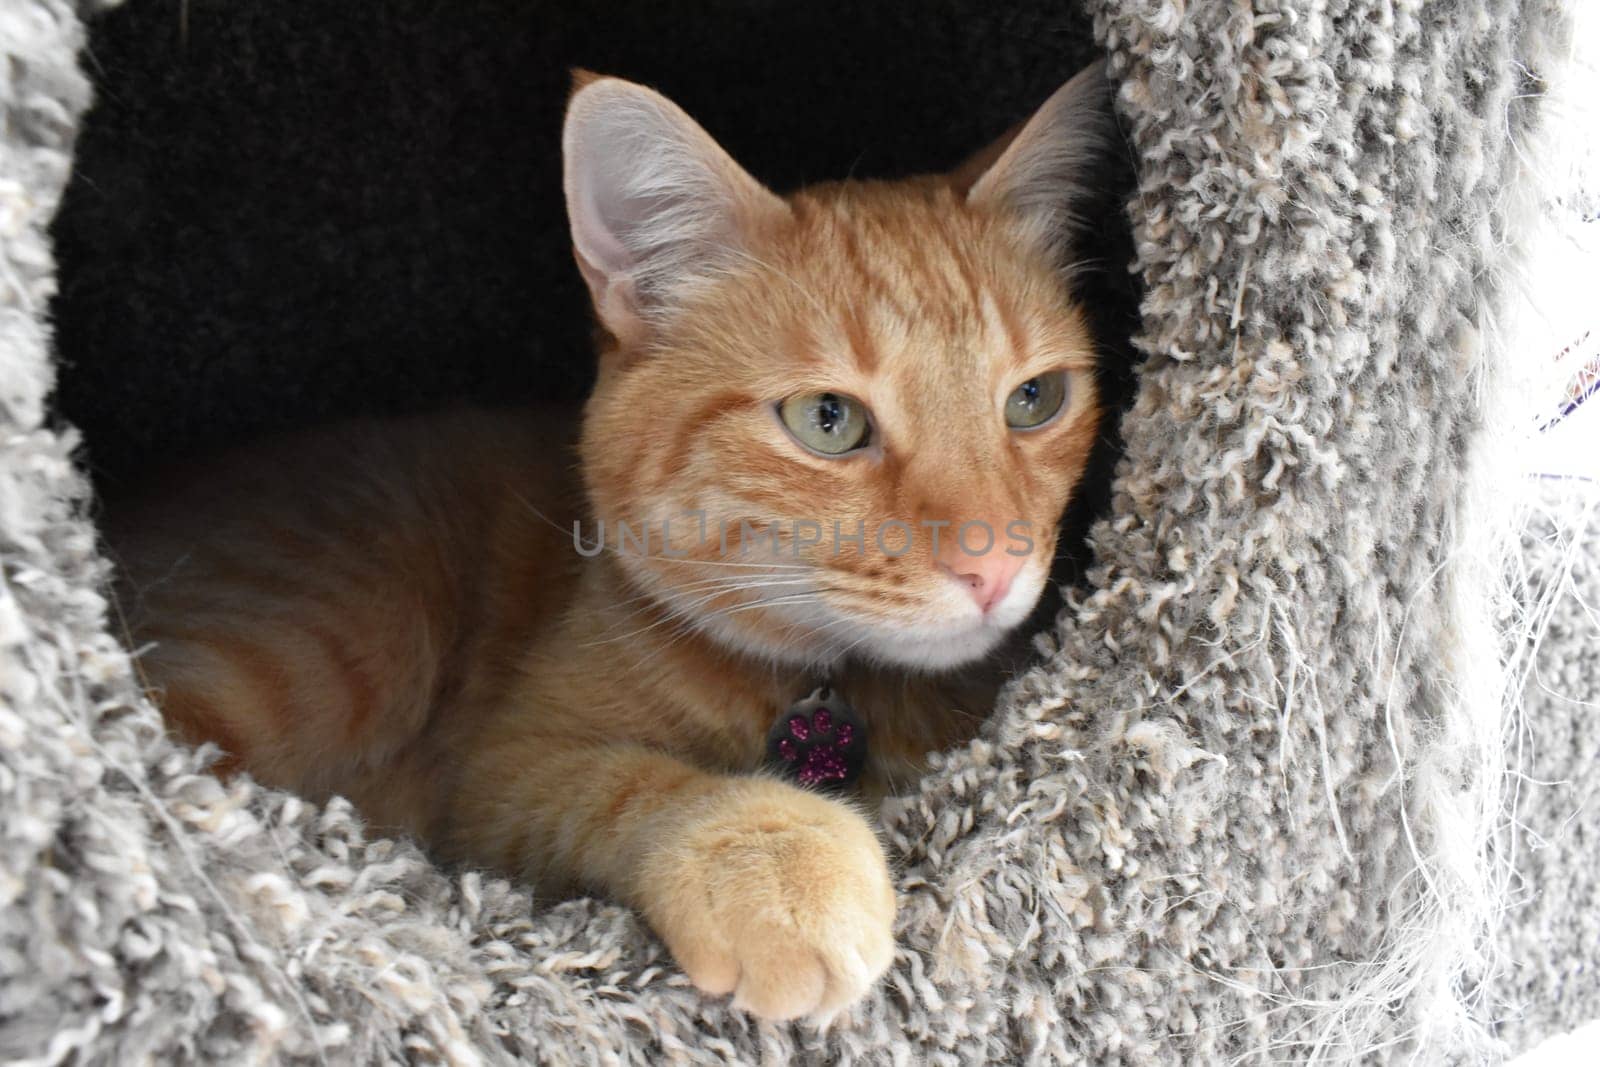 Orange Tabby with Green Eyes in Cat Condo. High quality photo